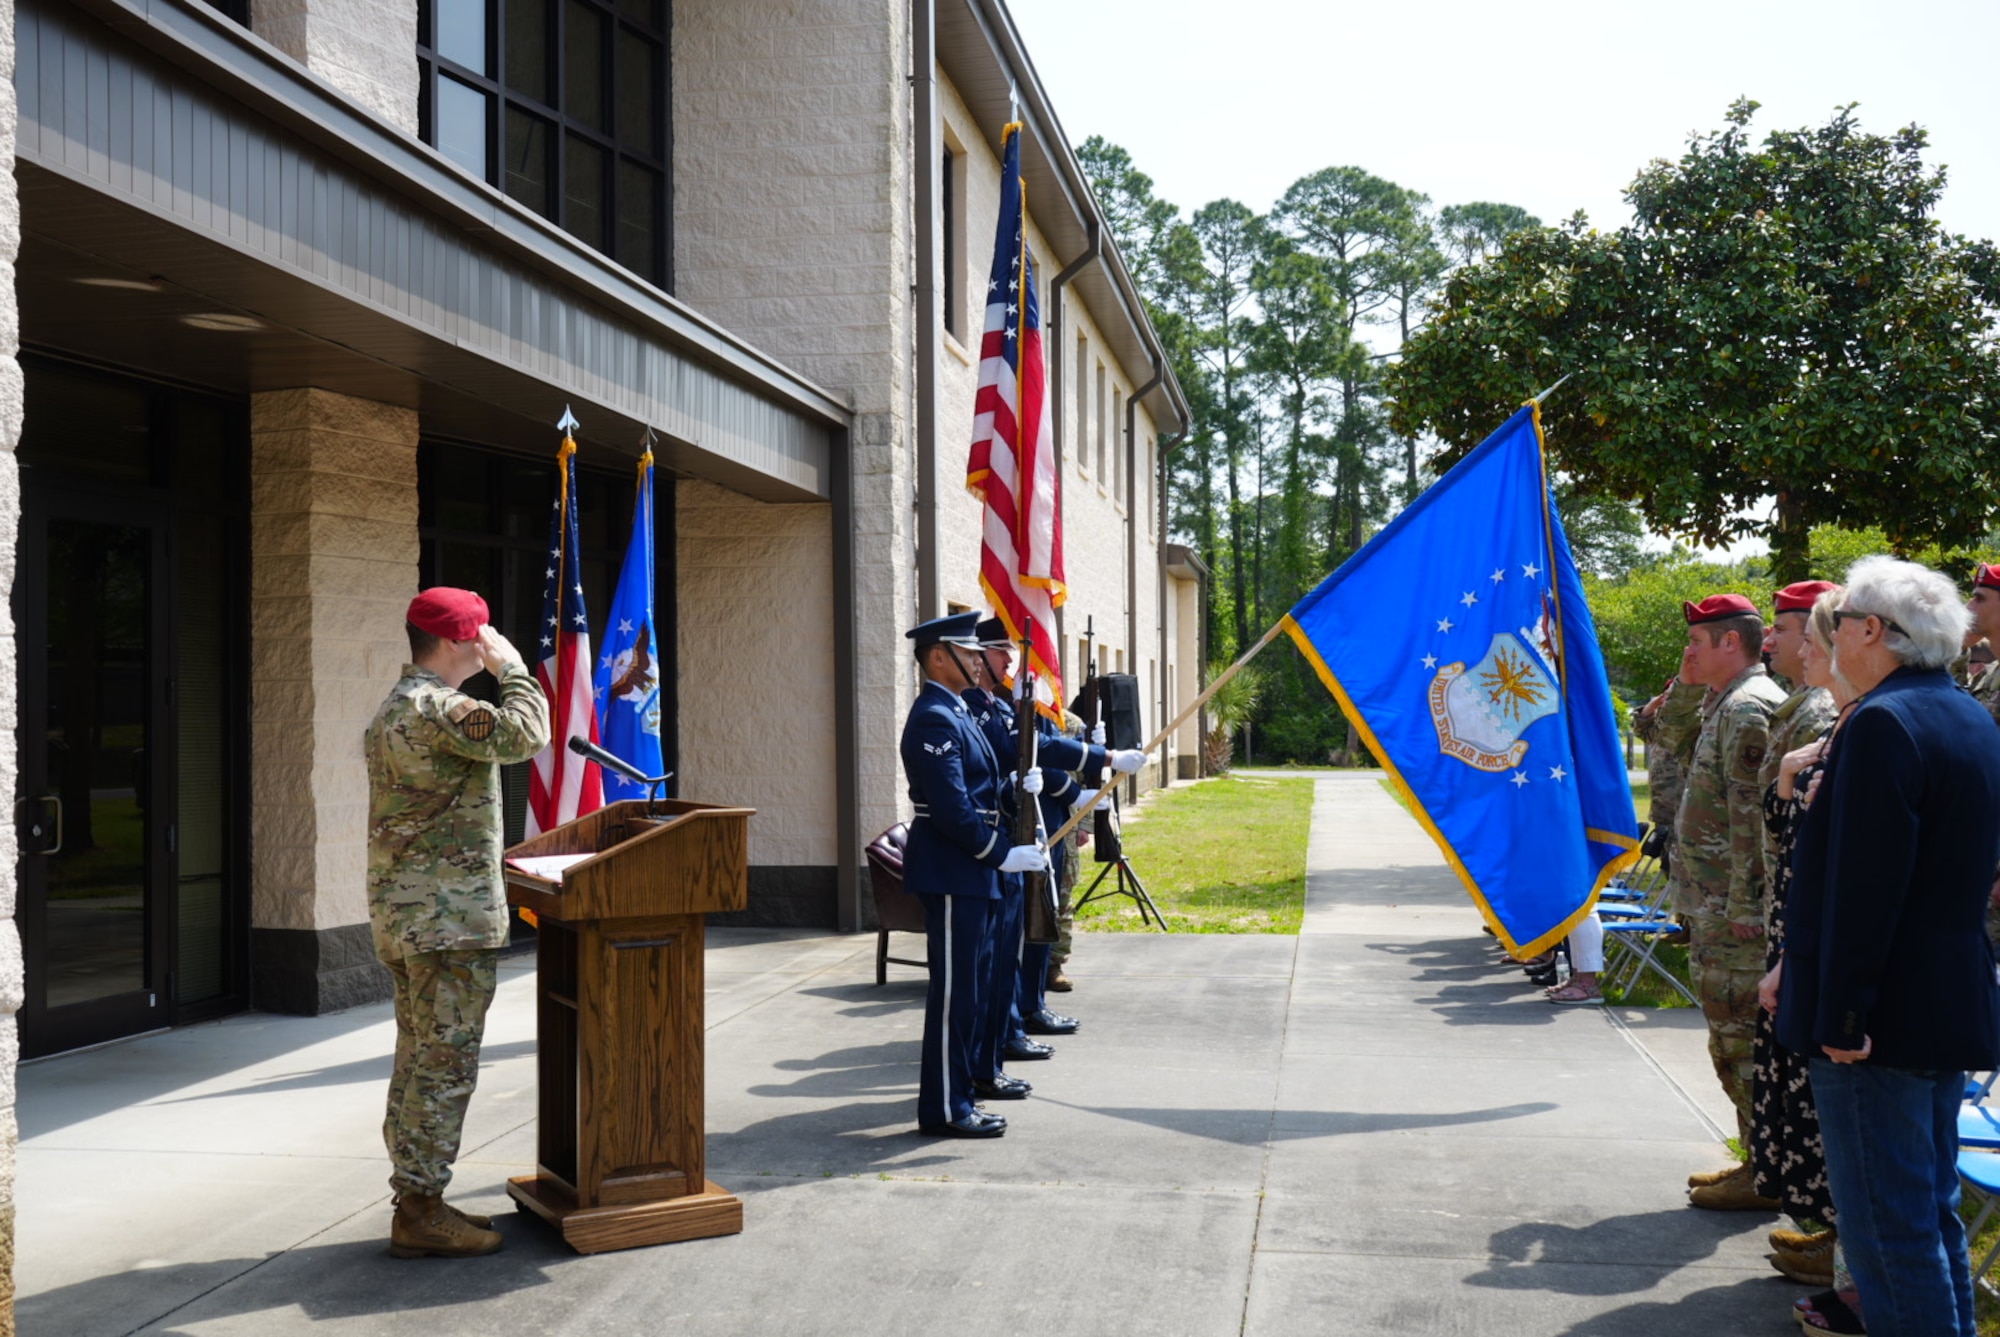 A dedication ceremony was held in honor of Senior Airman Danny Sanchez, who was killed-in-action in Afghanistan on Sept. 16, 2010, at the Special Tactics Training Squadron. (U.S. Air Force Photo by Capt. Savannah Stephens)